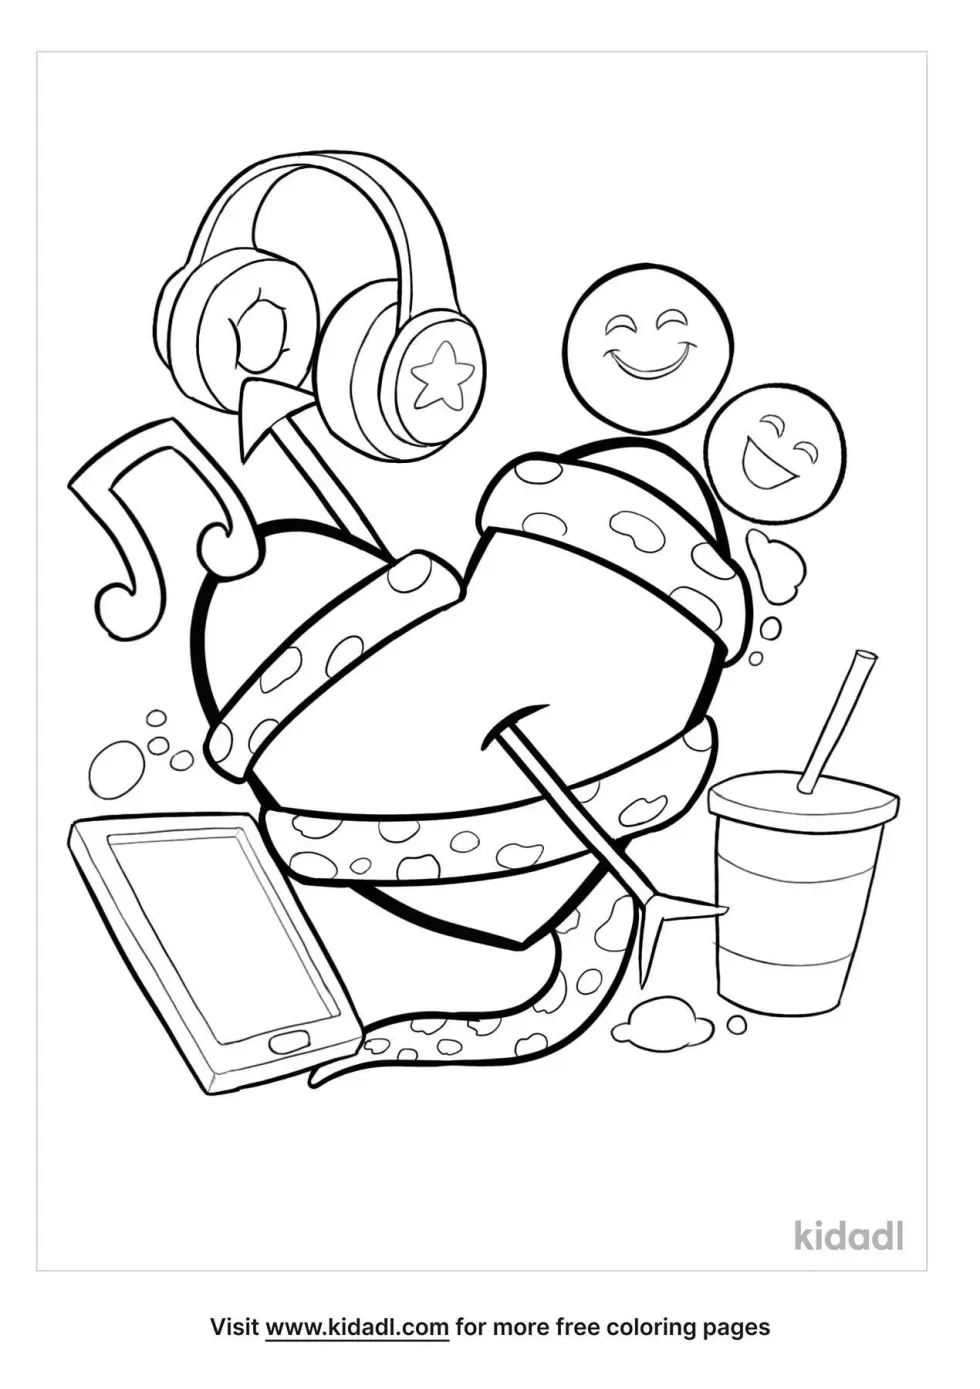 Teens' Coloring Page